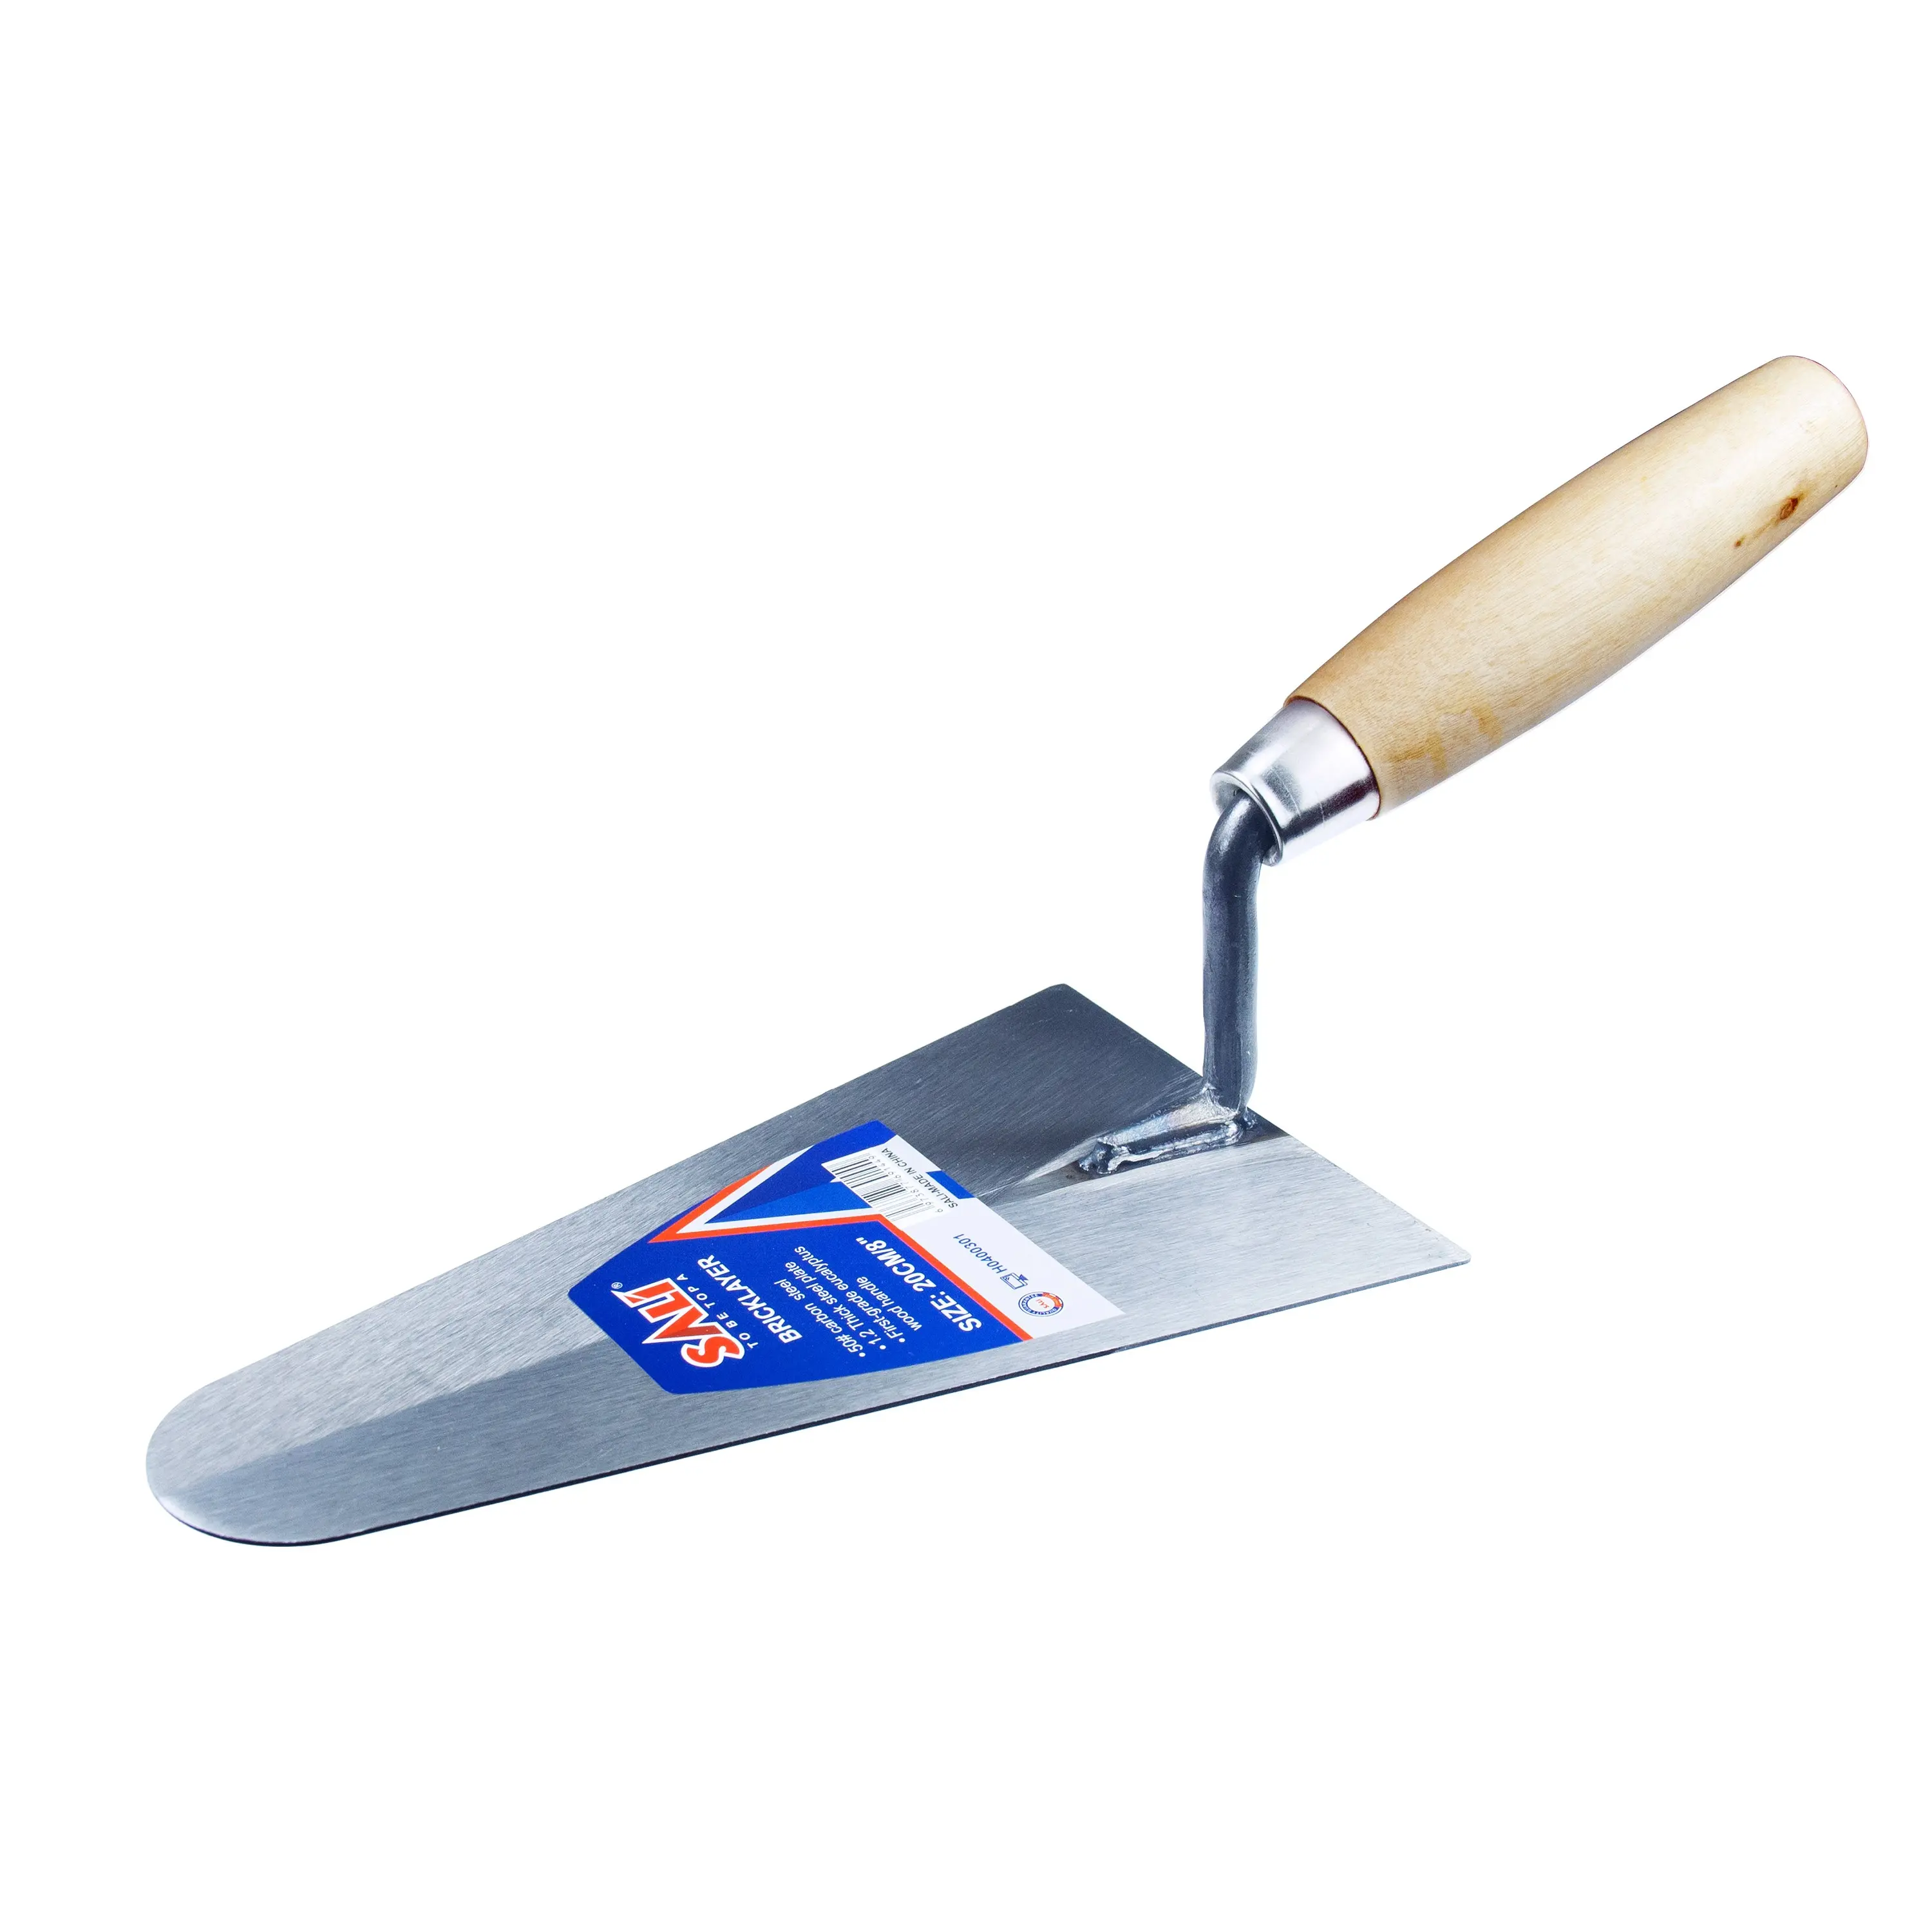 SALI 9 Inch Rust Protection Wooden Handle Carbon Steel Bricklaying Trowel